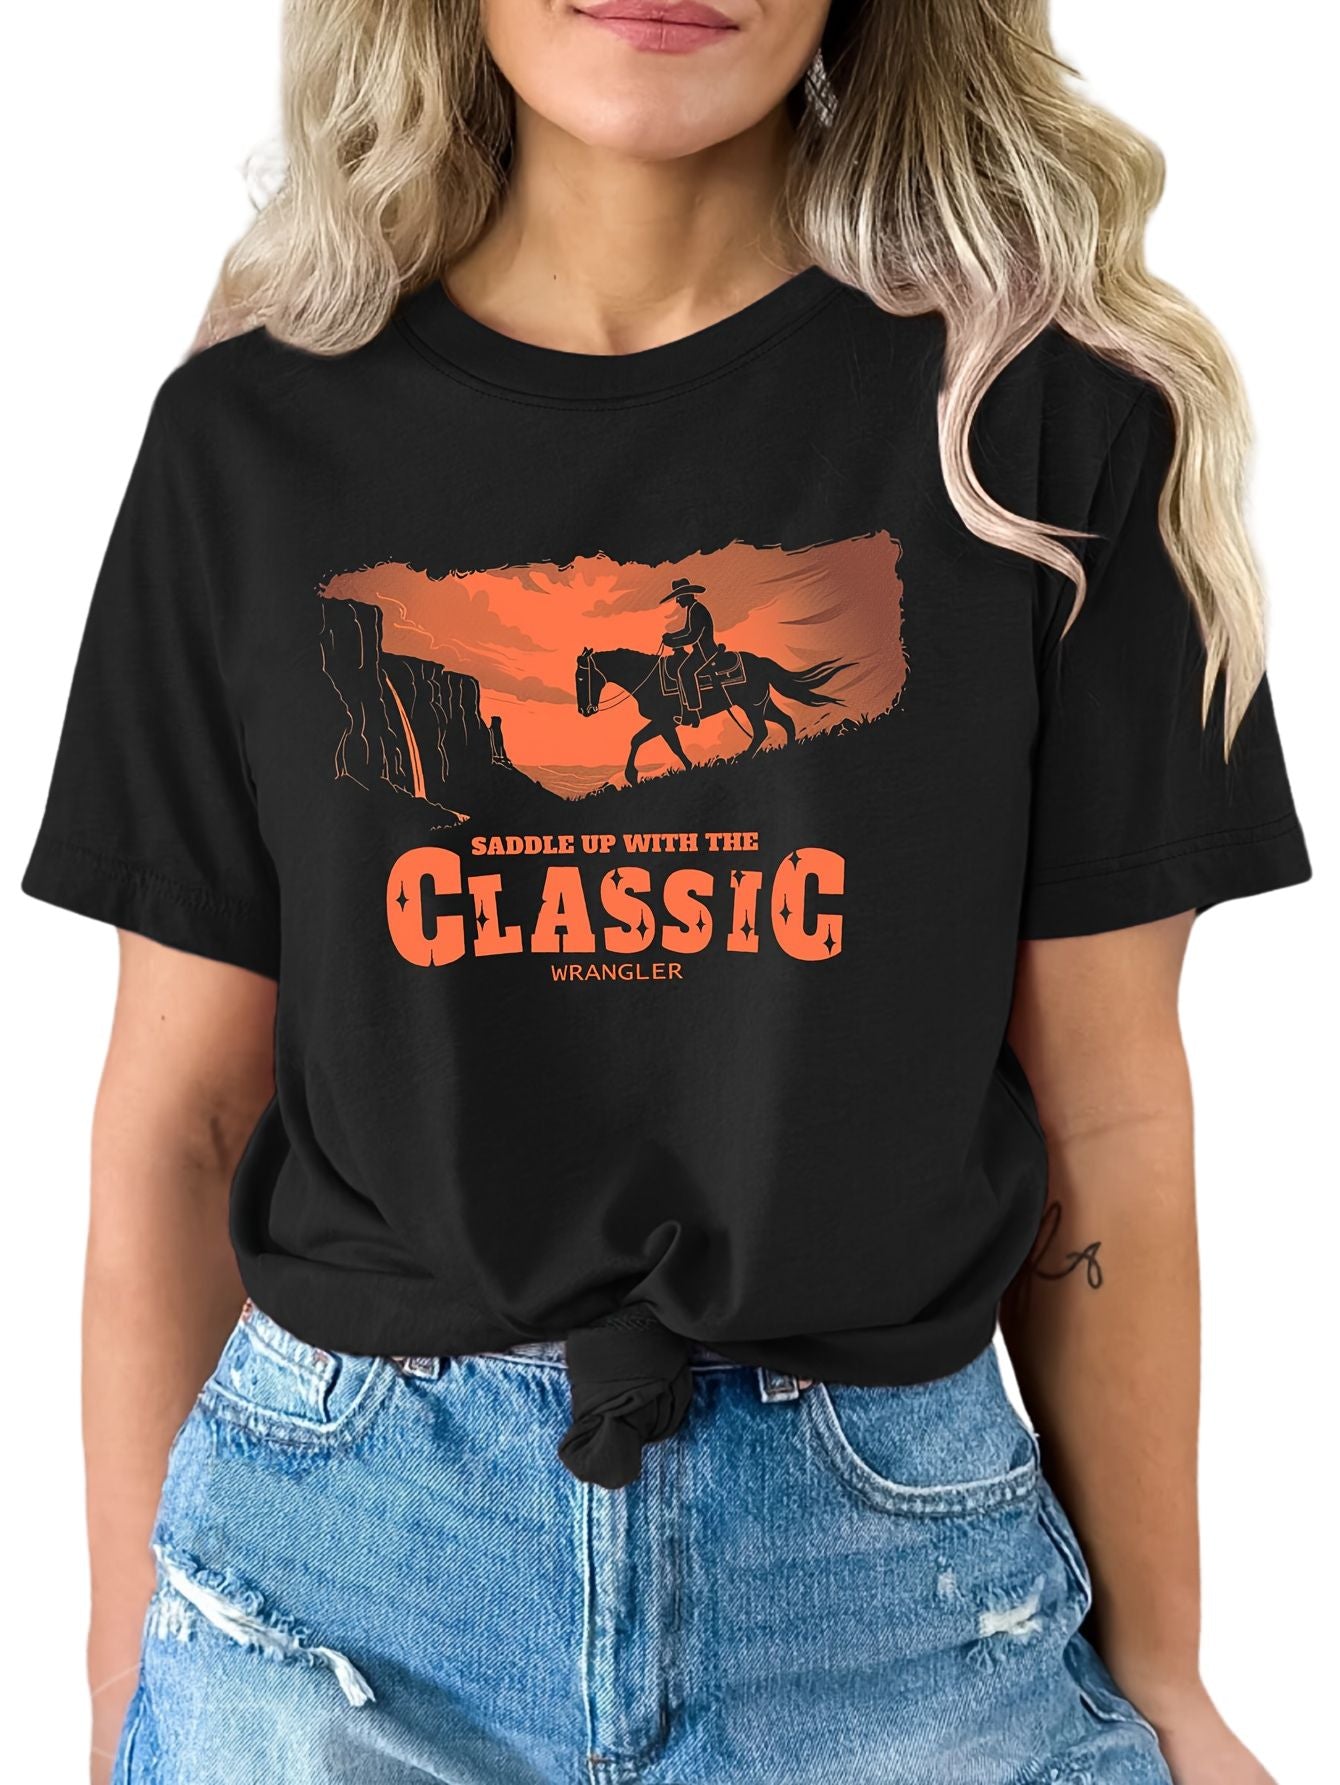 Cowboy Print T-shirt, Short Sleeve Crew Neck Casual Top For Summer & Spring, Women's Clothing